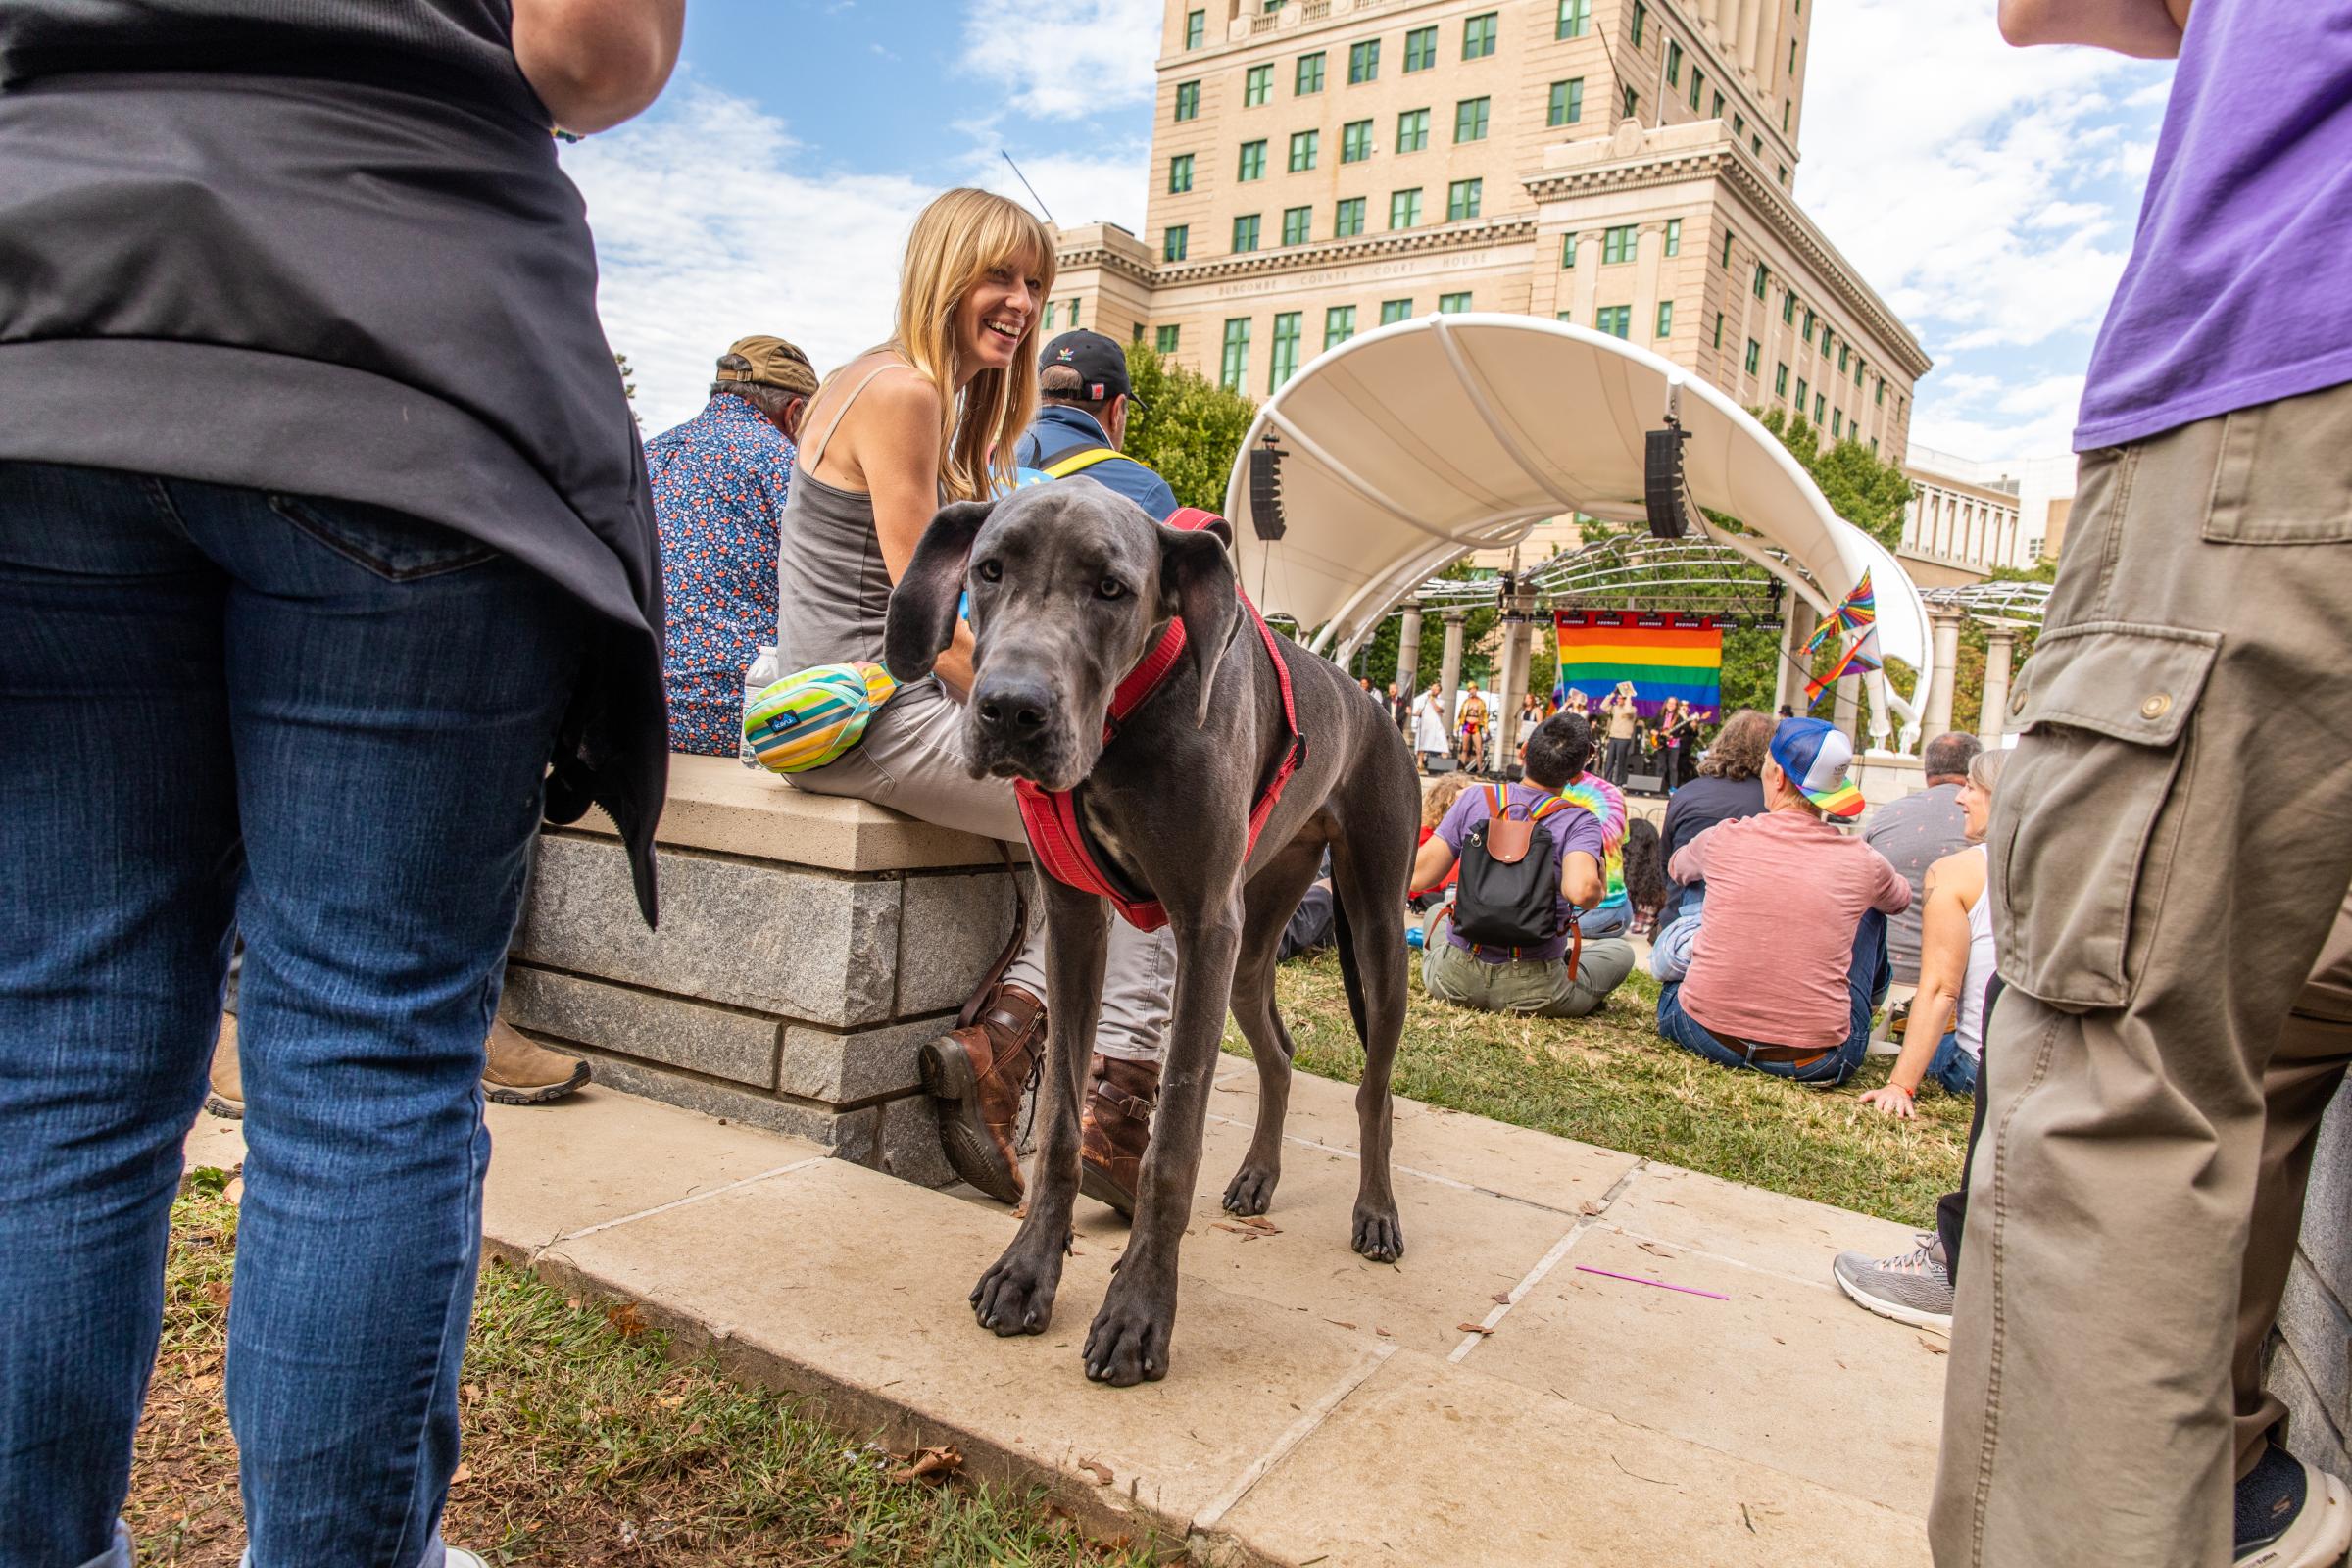 Blue Ridge Pride Festival 2022 - Dogs were welcome at the festival like they are in most areas of Asheville.